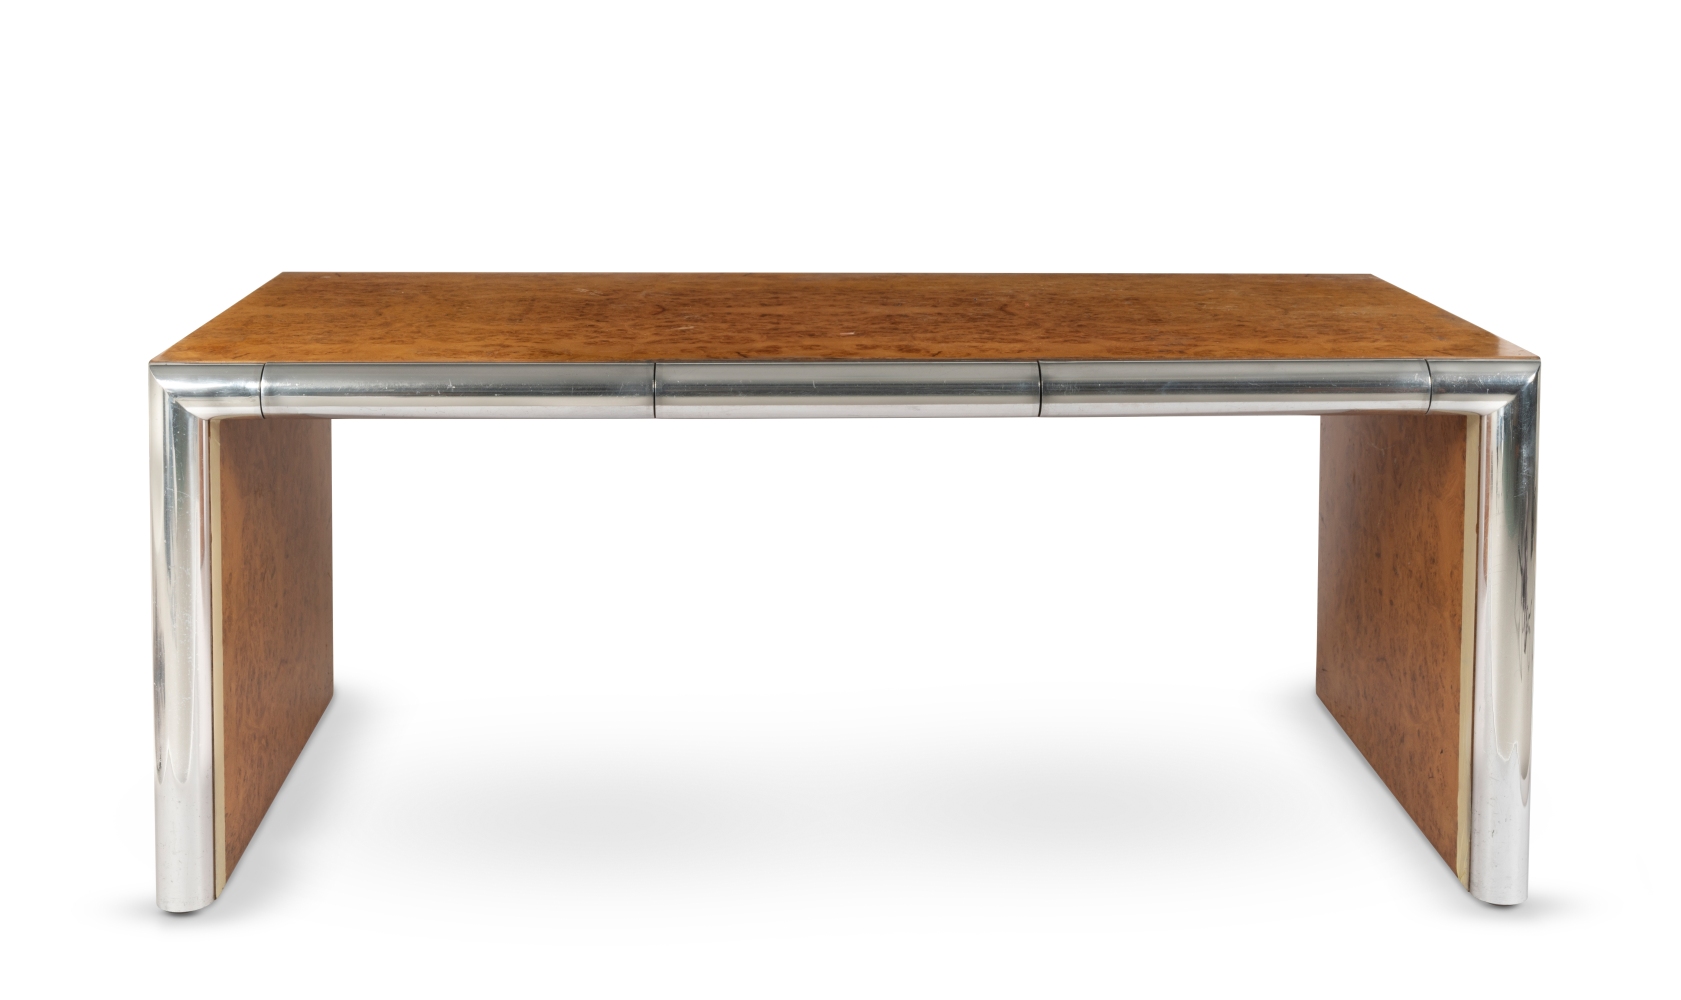 Sir Terence Conran's burr oak and nickel-plated desk from Butler's Wharf